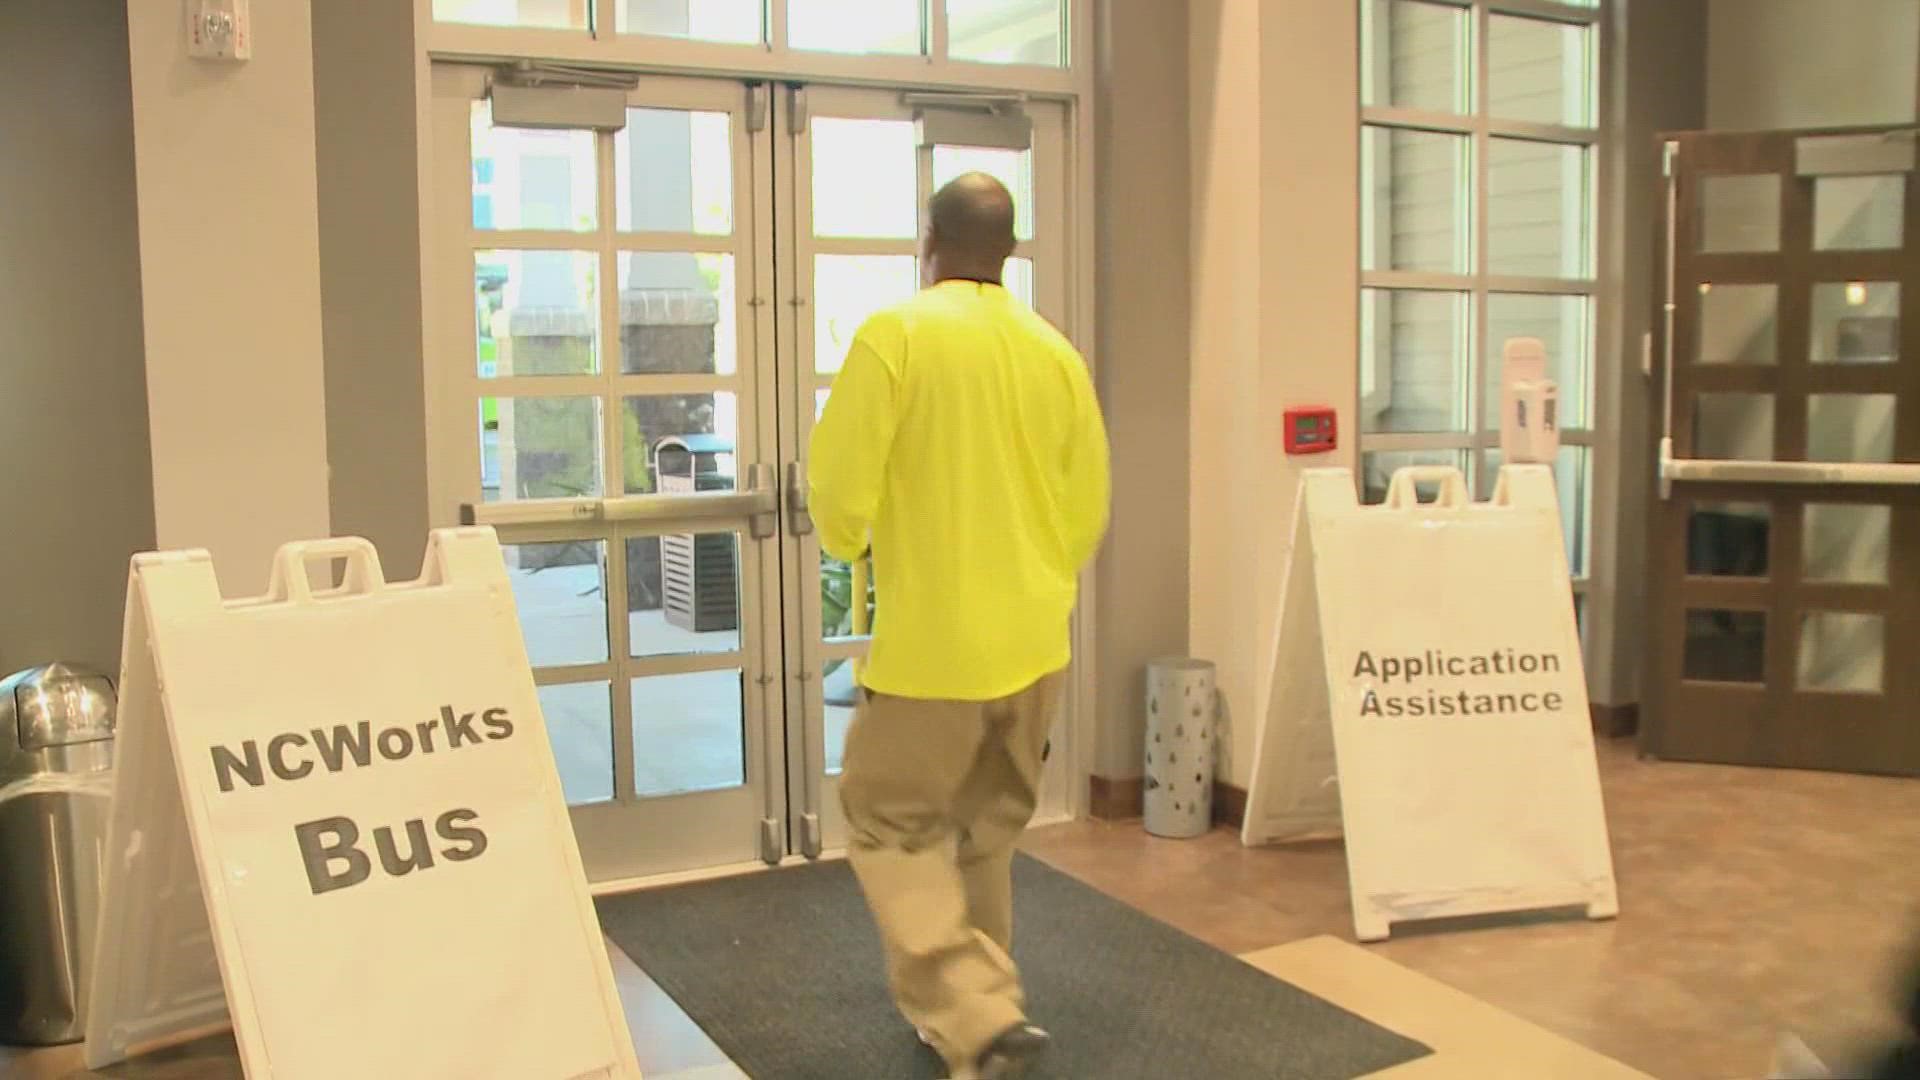 The city held a job fair to fill hundreds of positions across multiple departments.